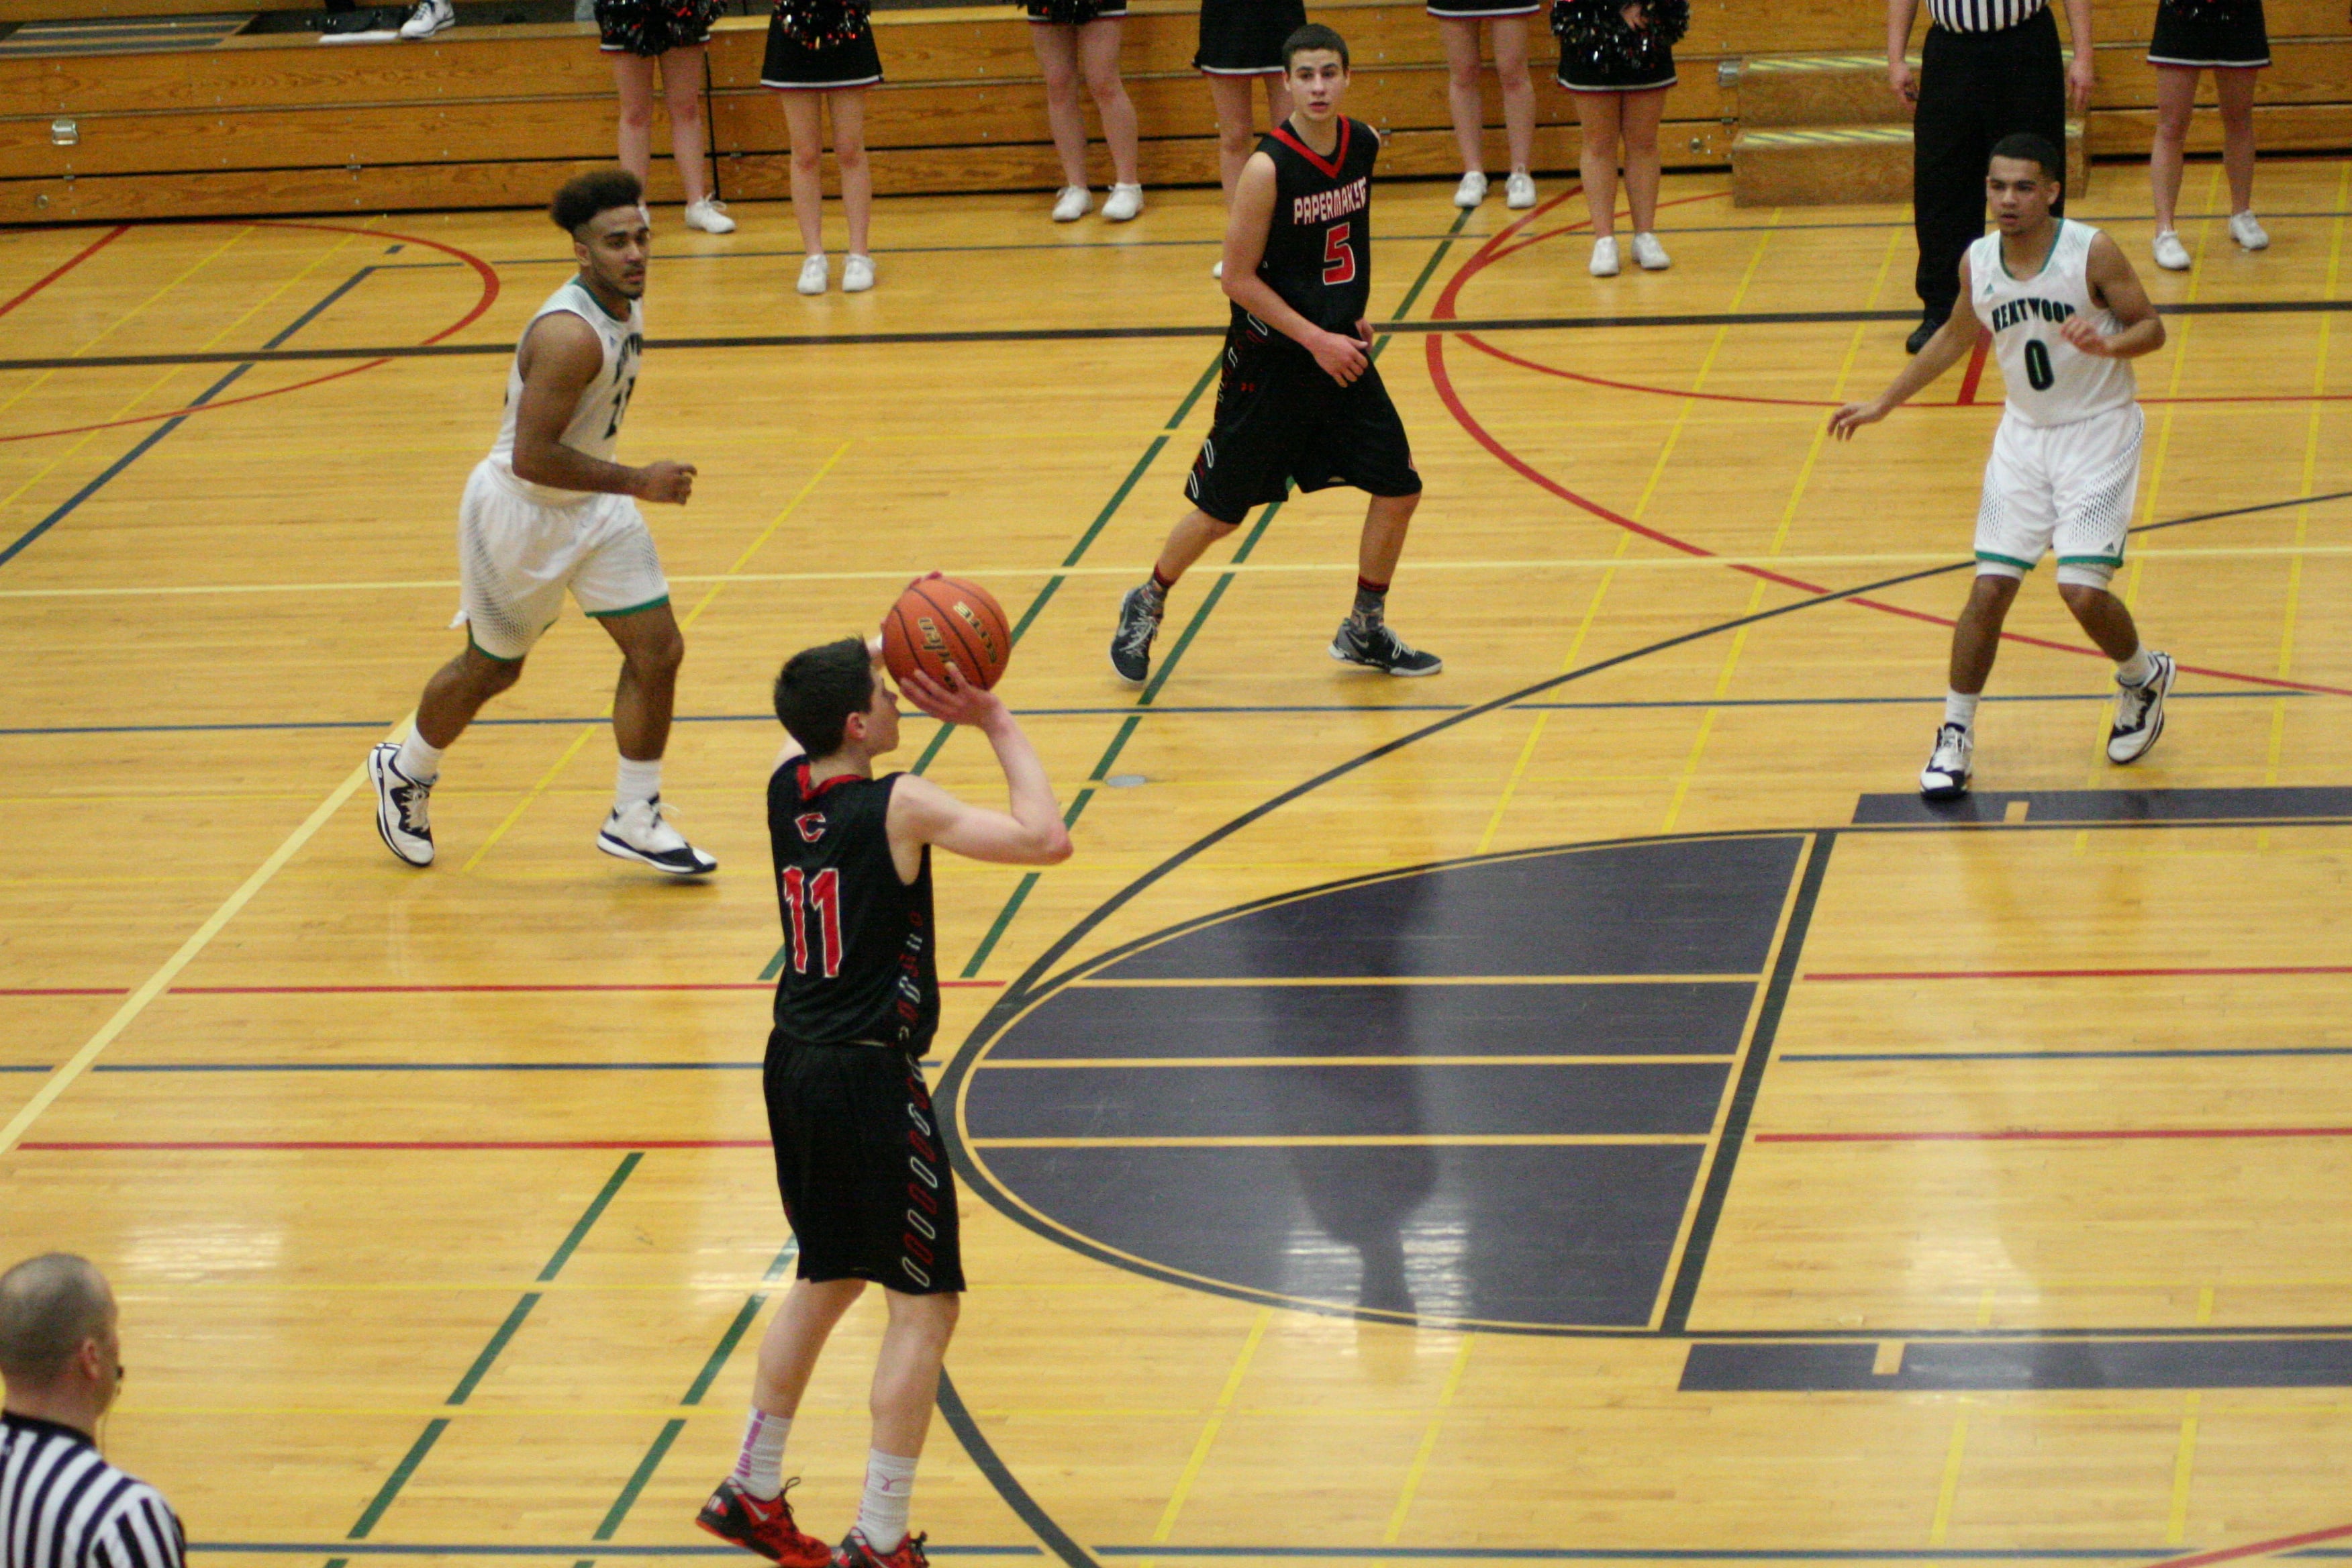 Ethan Unger releases a huge 3-pointer to bring Camas within two points of Kentwood during the final minute of play.